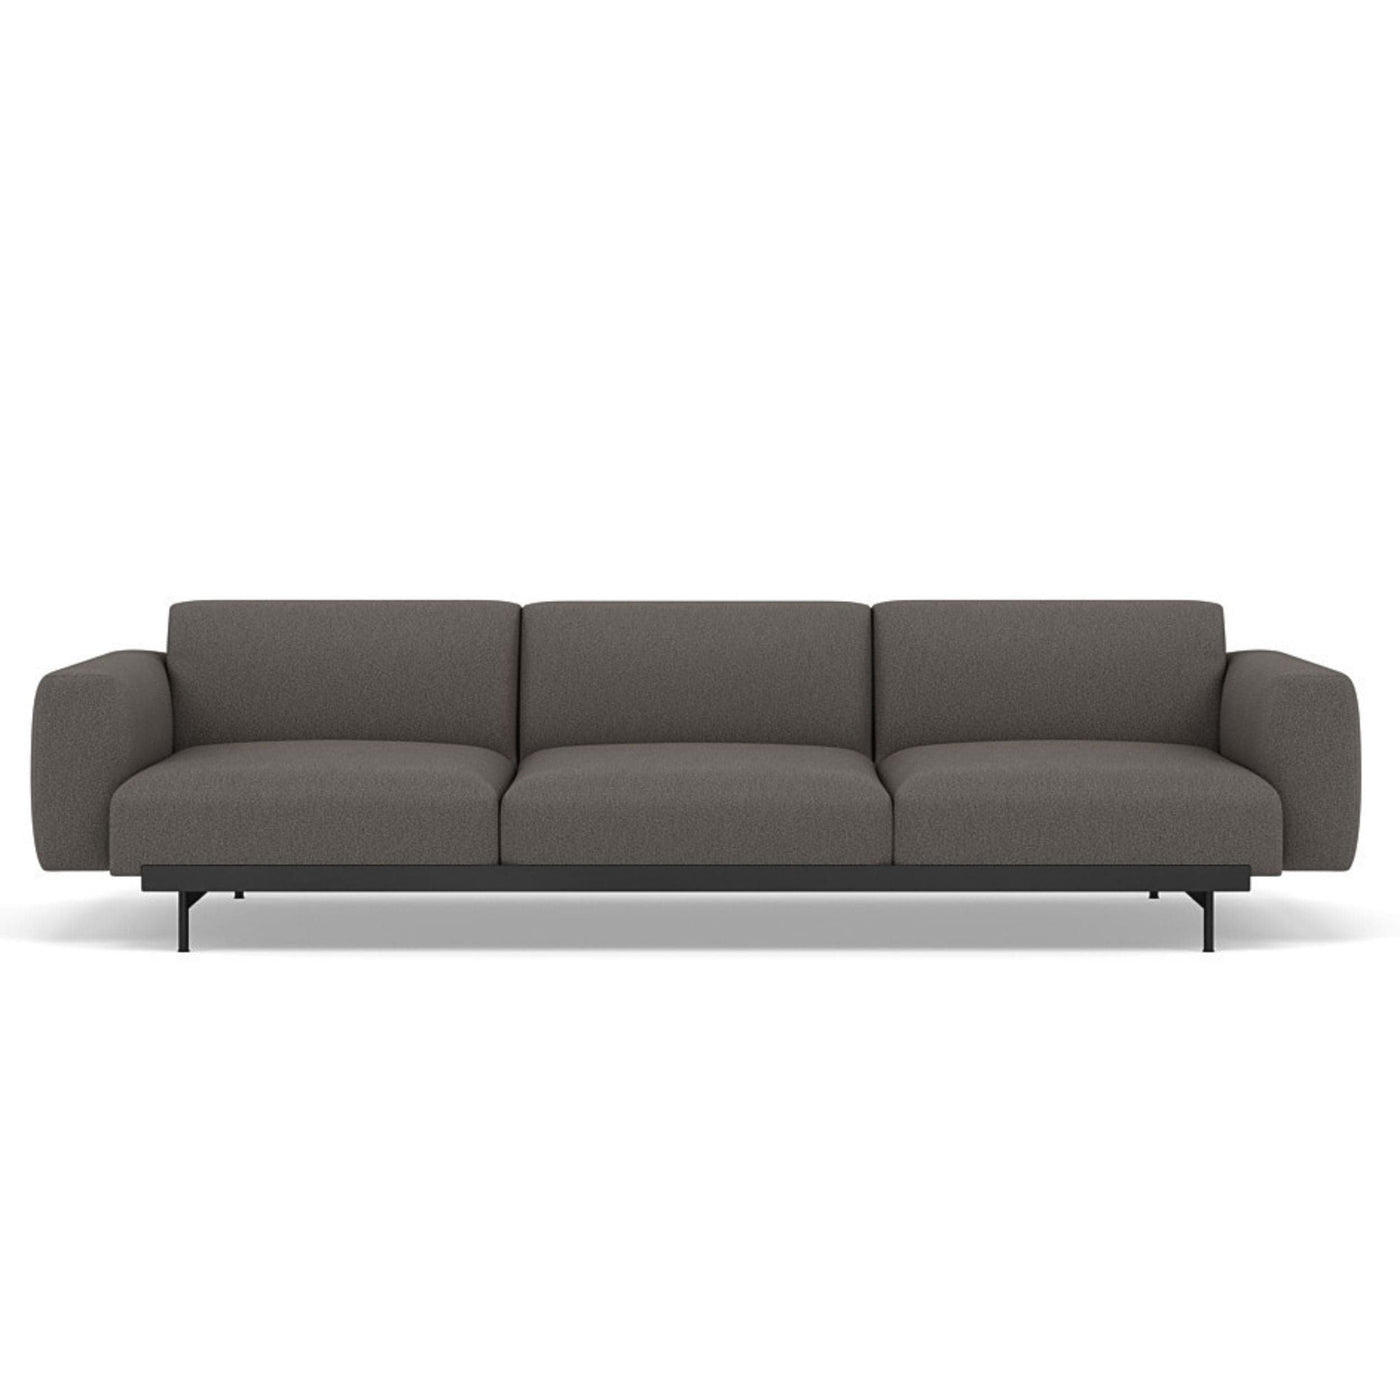 Muuto In Situ Modular 3 Seater Sofa, configuration 1. Made to order from someday designs. #colour_clay-9